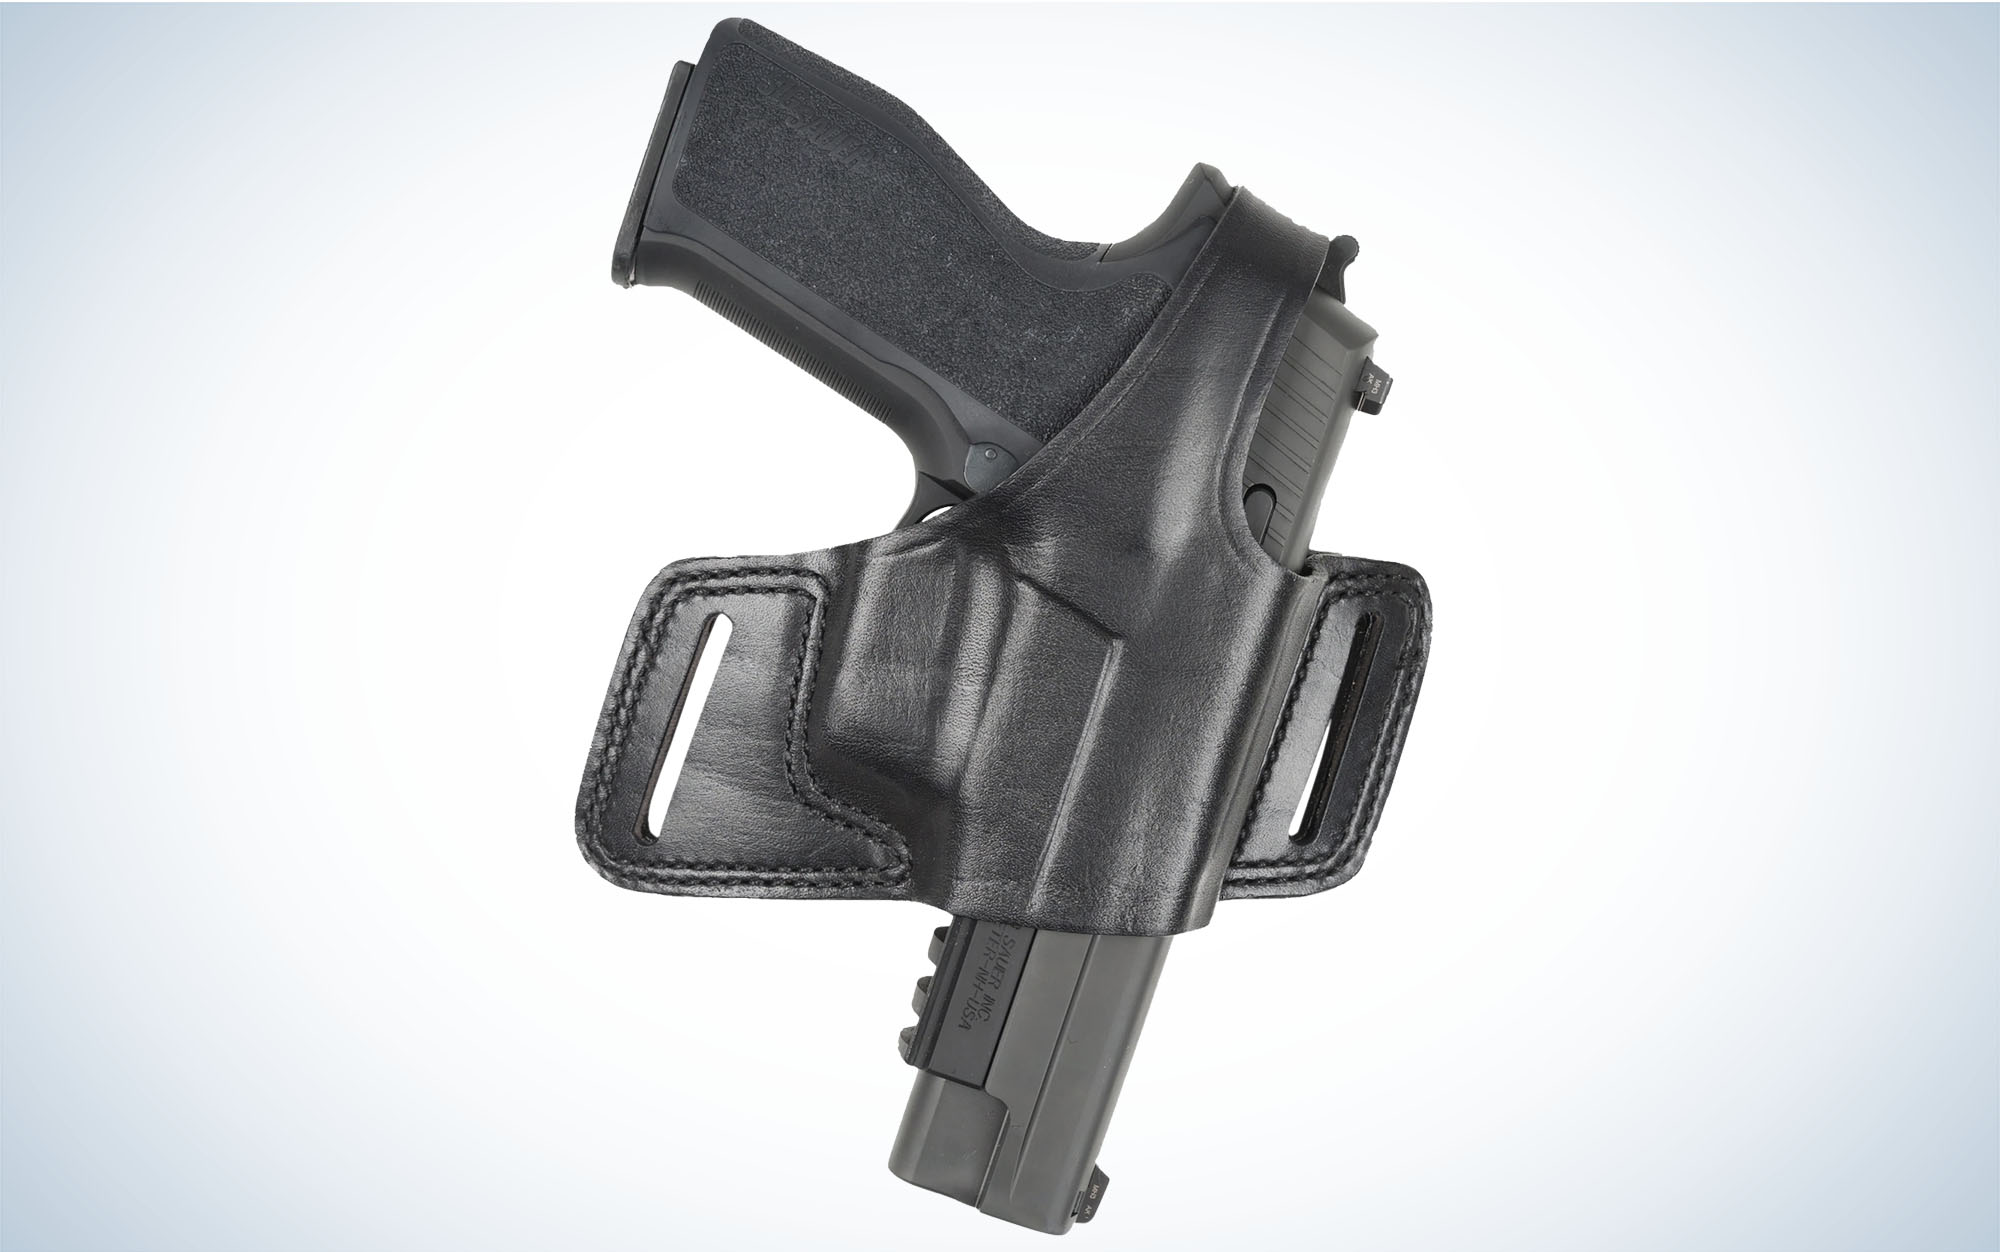 The Bianchi Black Widow Snaplock OWB Holster is one of the best ccw holsters.